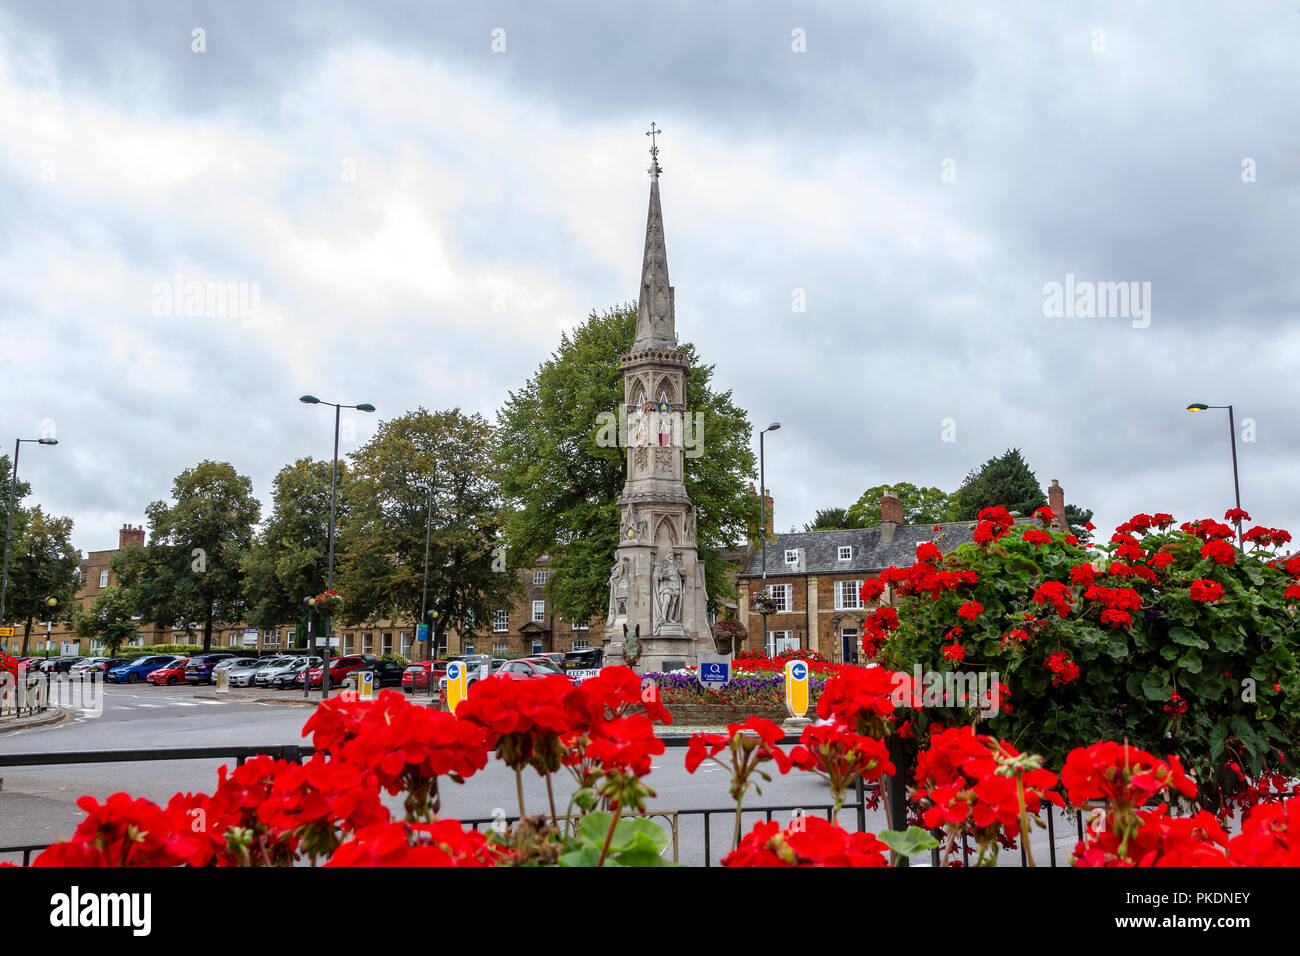 Council Offices in Banbury Oxfordshire, uk. Stock Photo